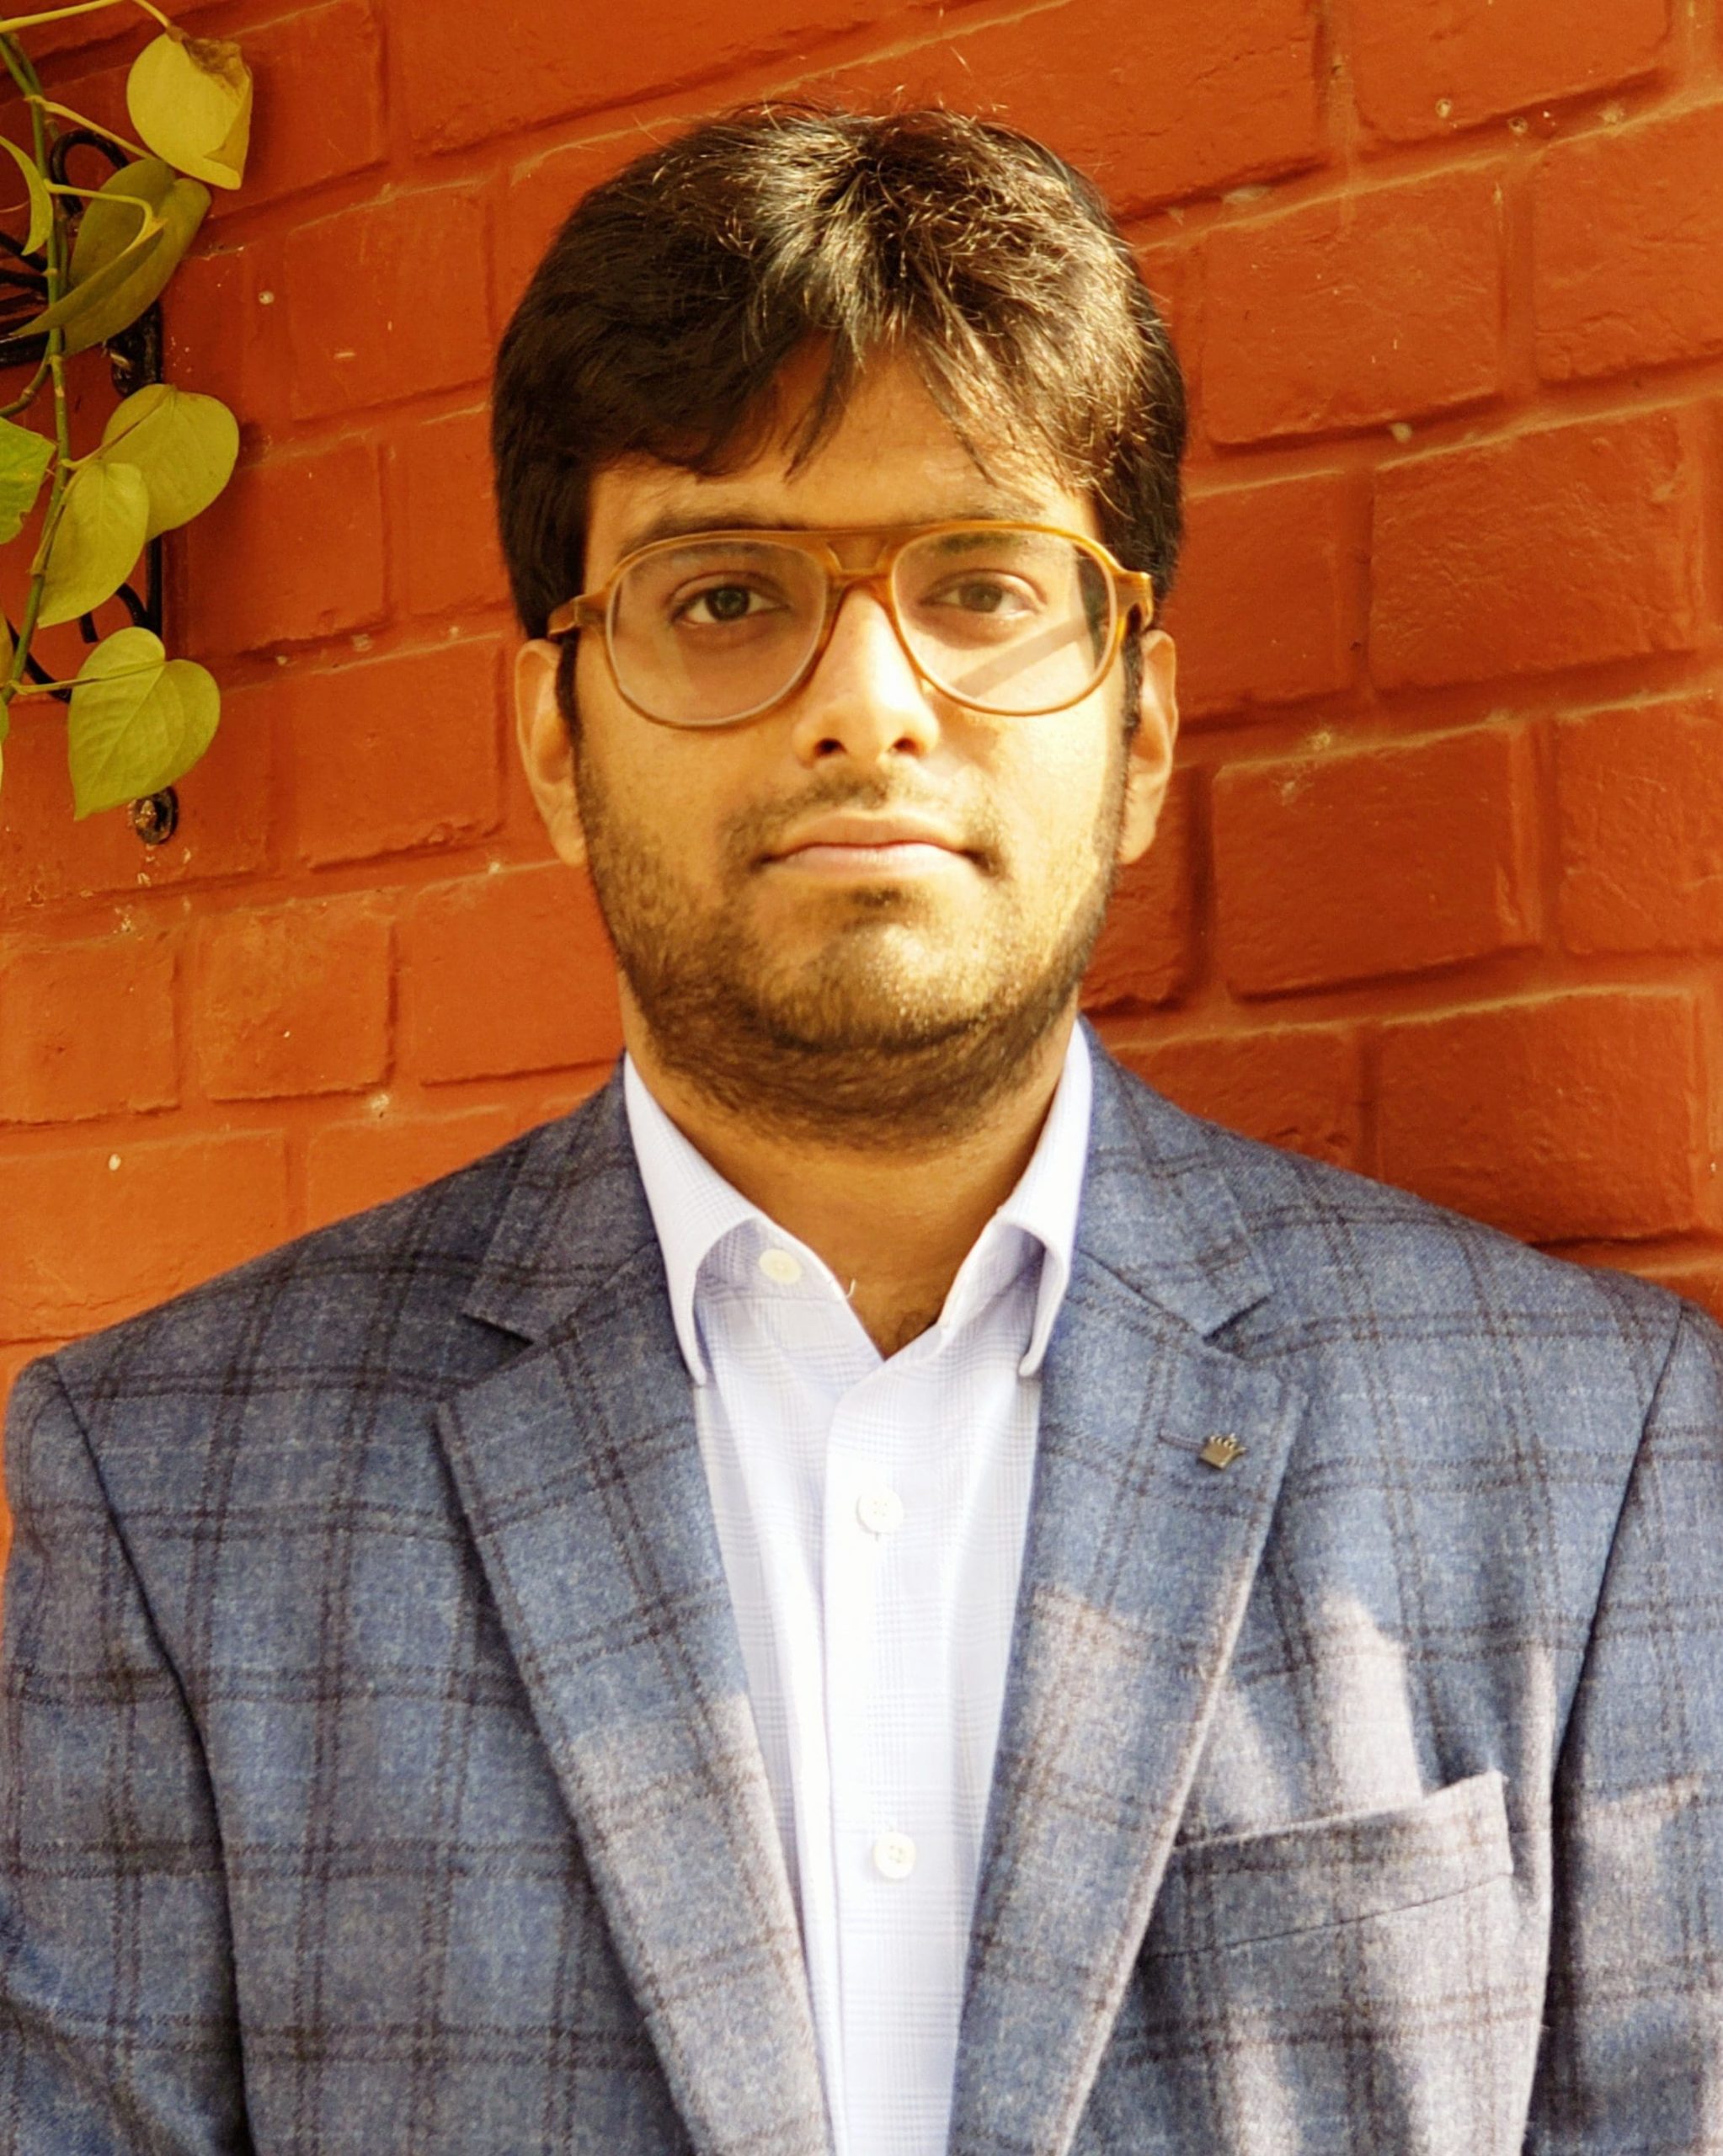 Graduate Student Aniruddha Ghosh has been awarded a fellowship from the George Mason University